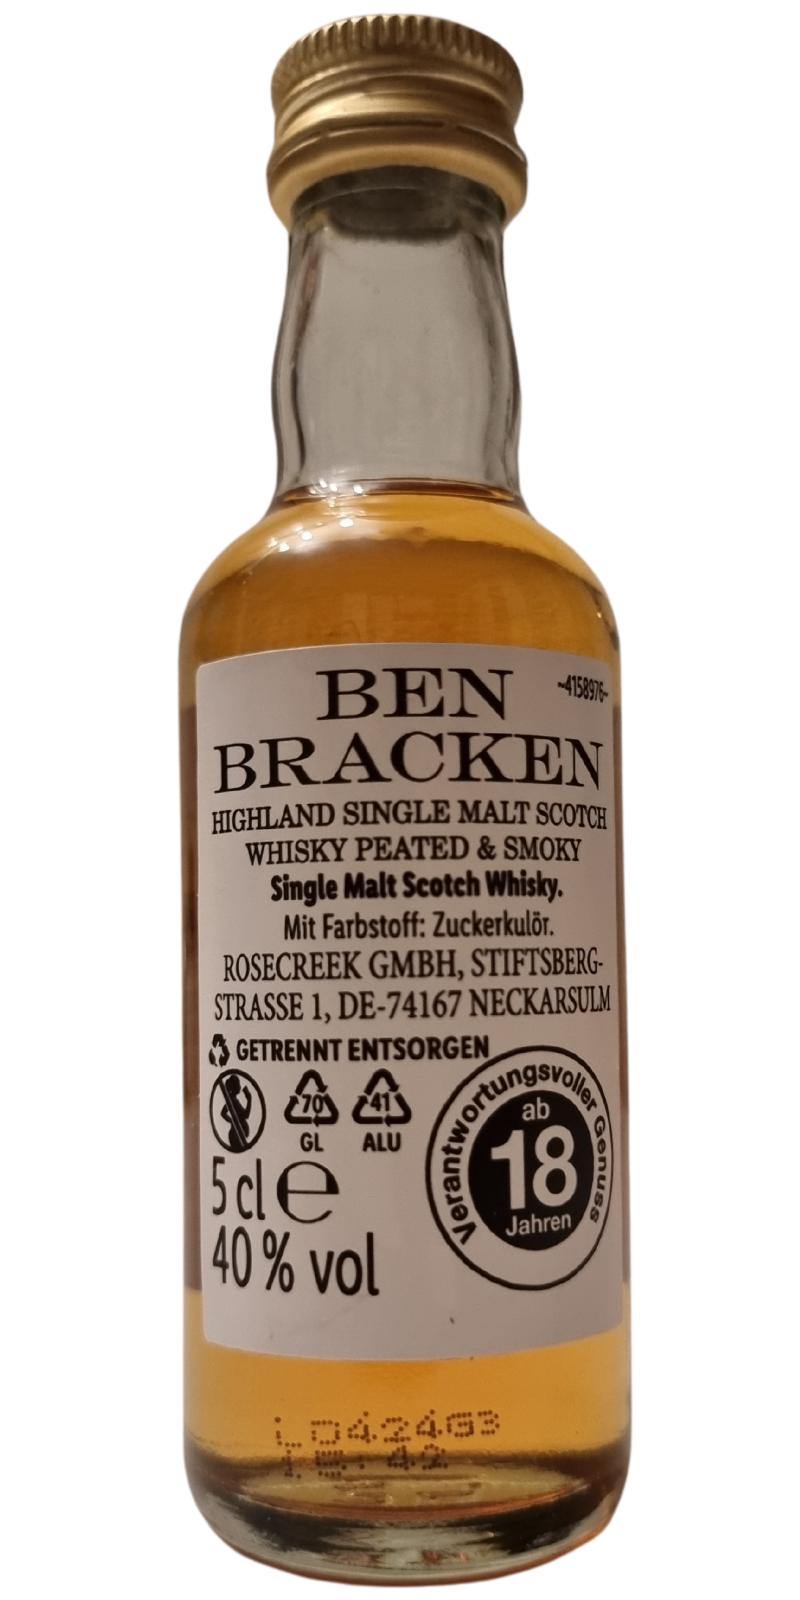 Ben Bracken Peated & Smoky Cd - Ratings and reviews - Whiskybase